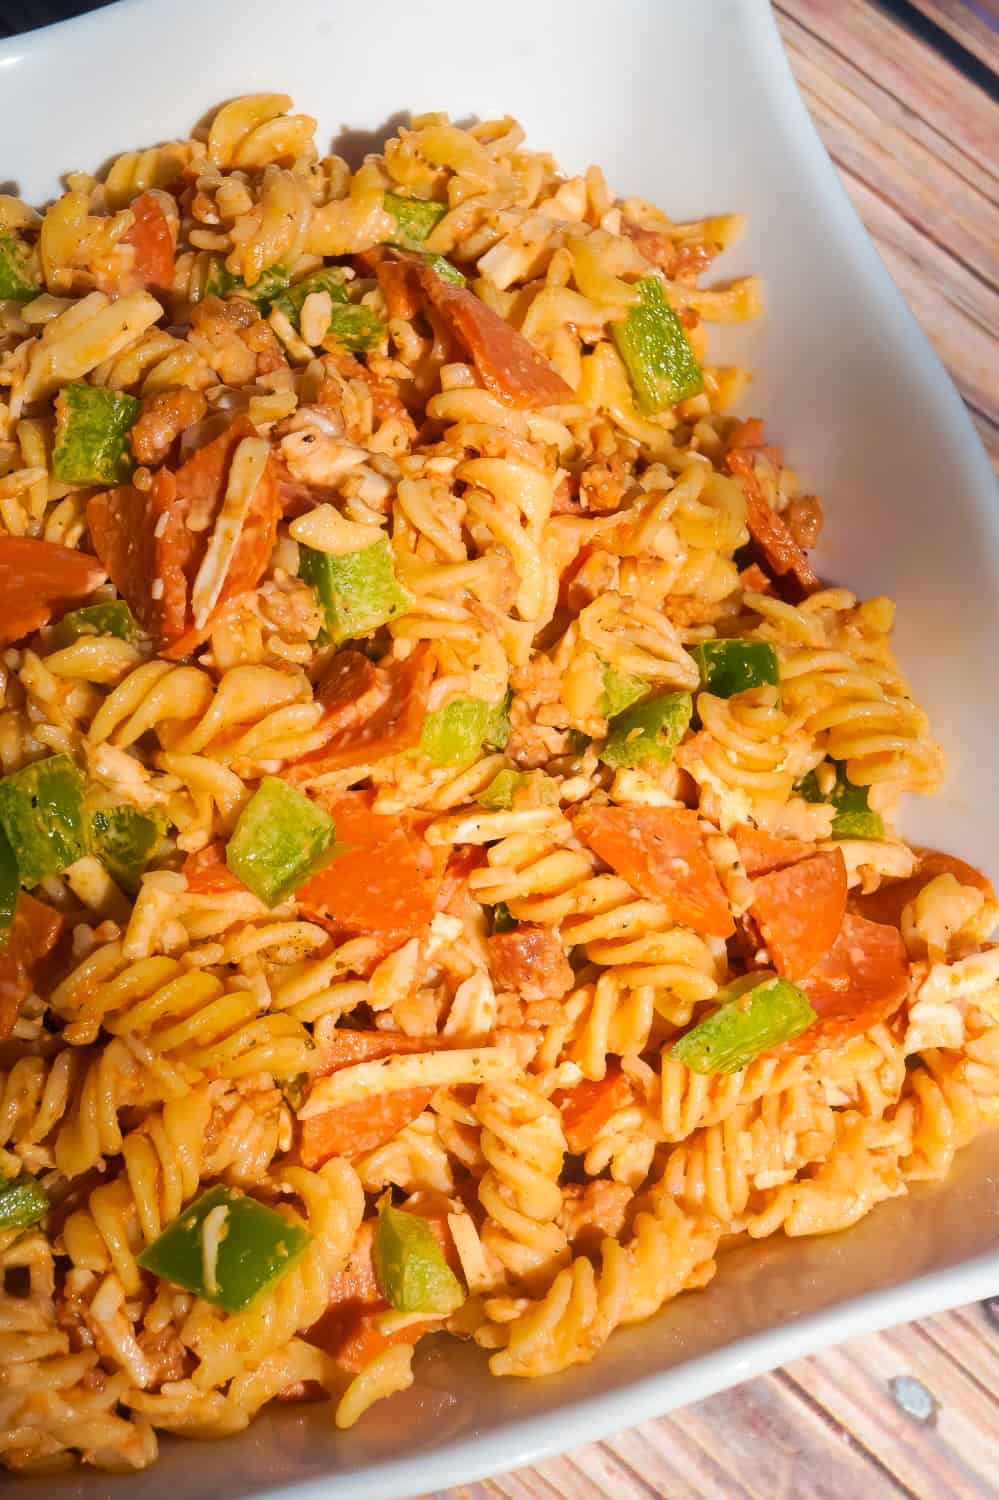 Pizza Pasta Salad is the perfect summer side dish. This pasta salad is loaded with pepperoni, bacon, green peppers and mozzarella cheese.